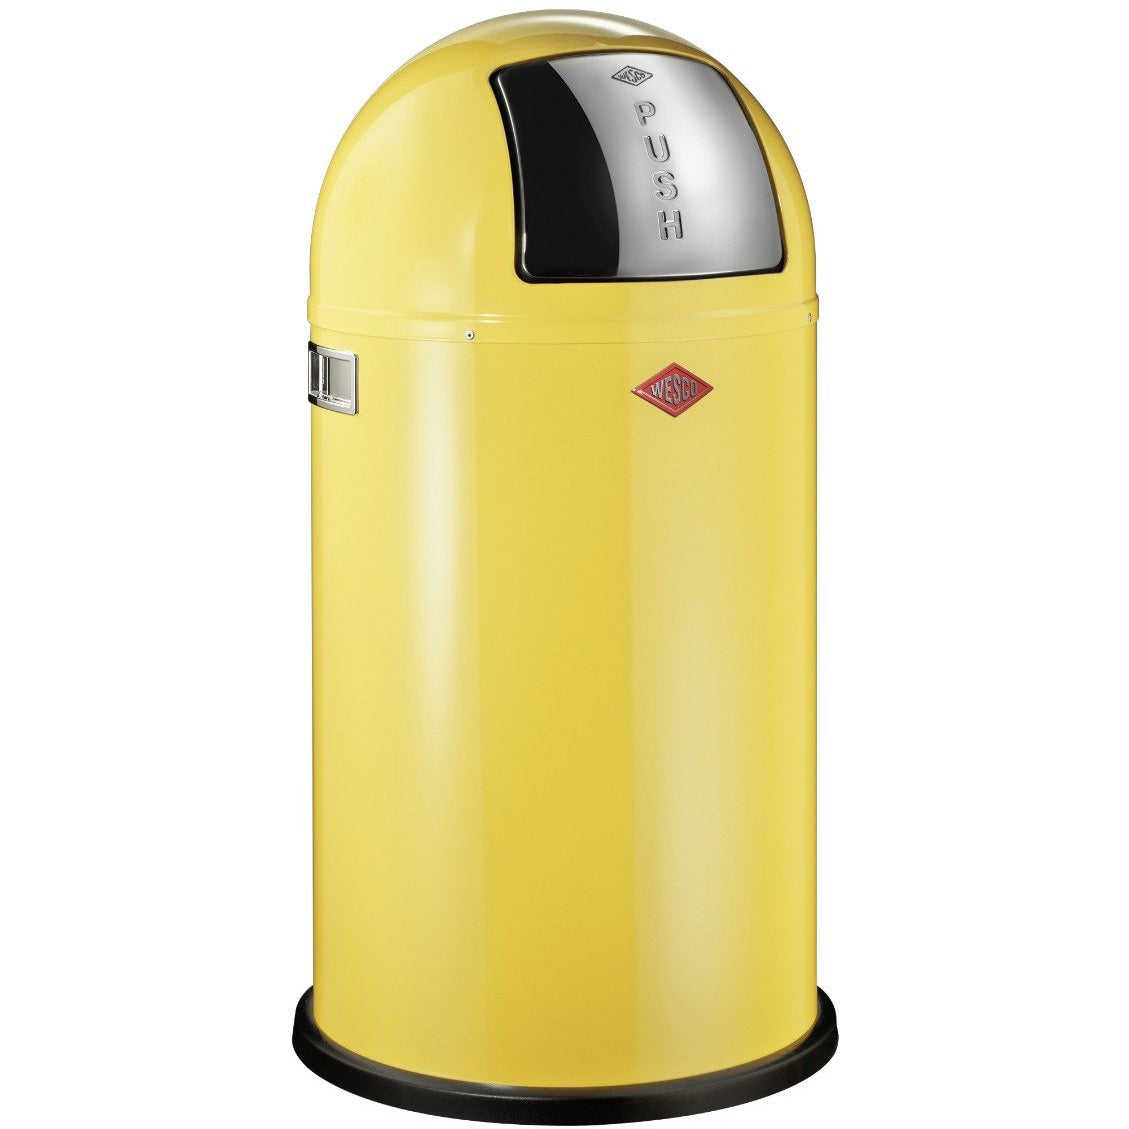 Wesco Pushboy Single Compartment 50 itreL Kitchen Bin in Yellow: 175831-19